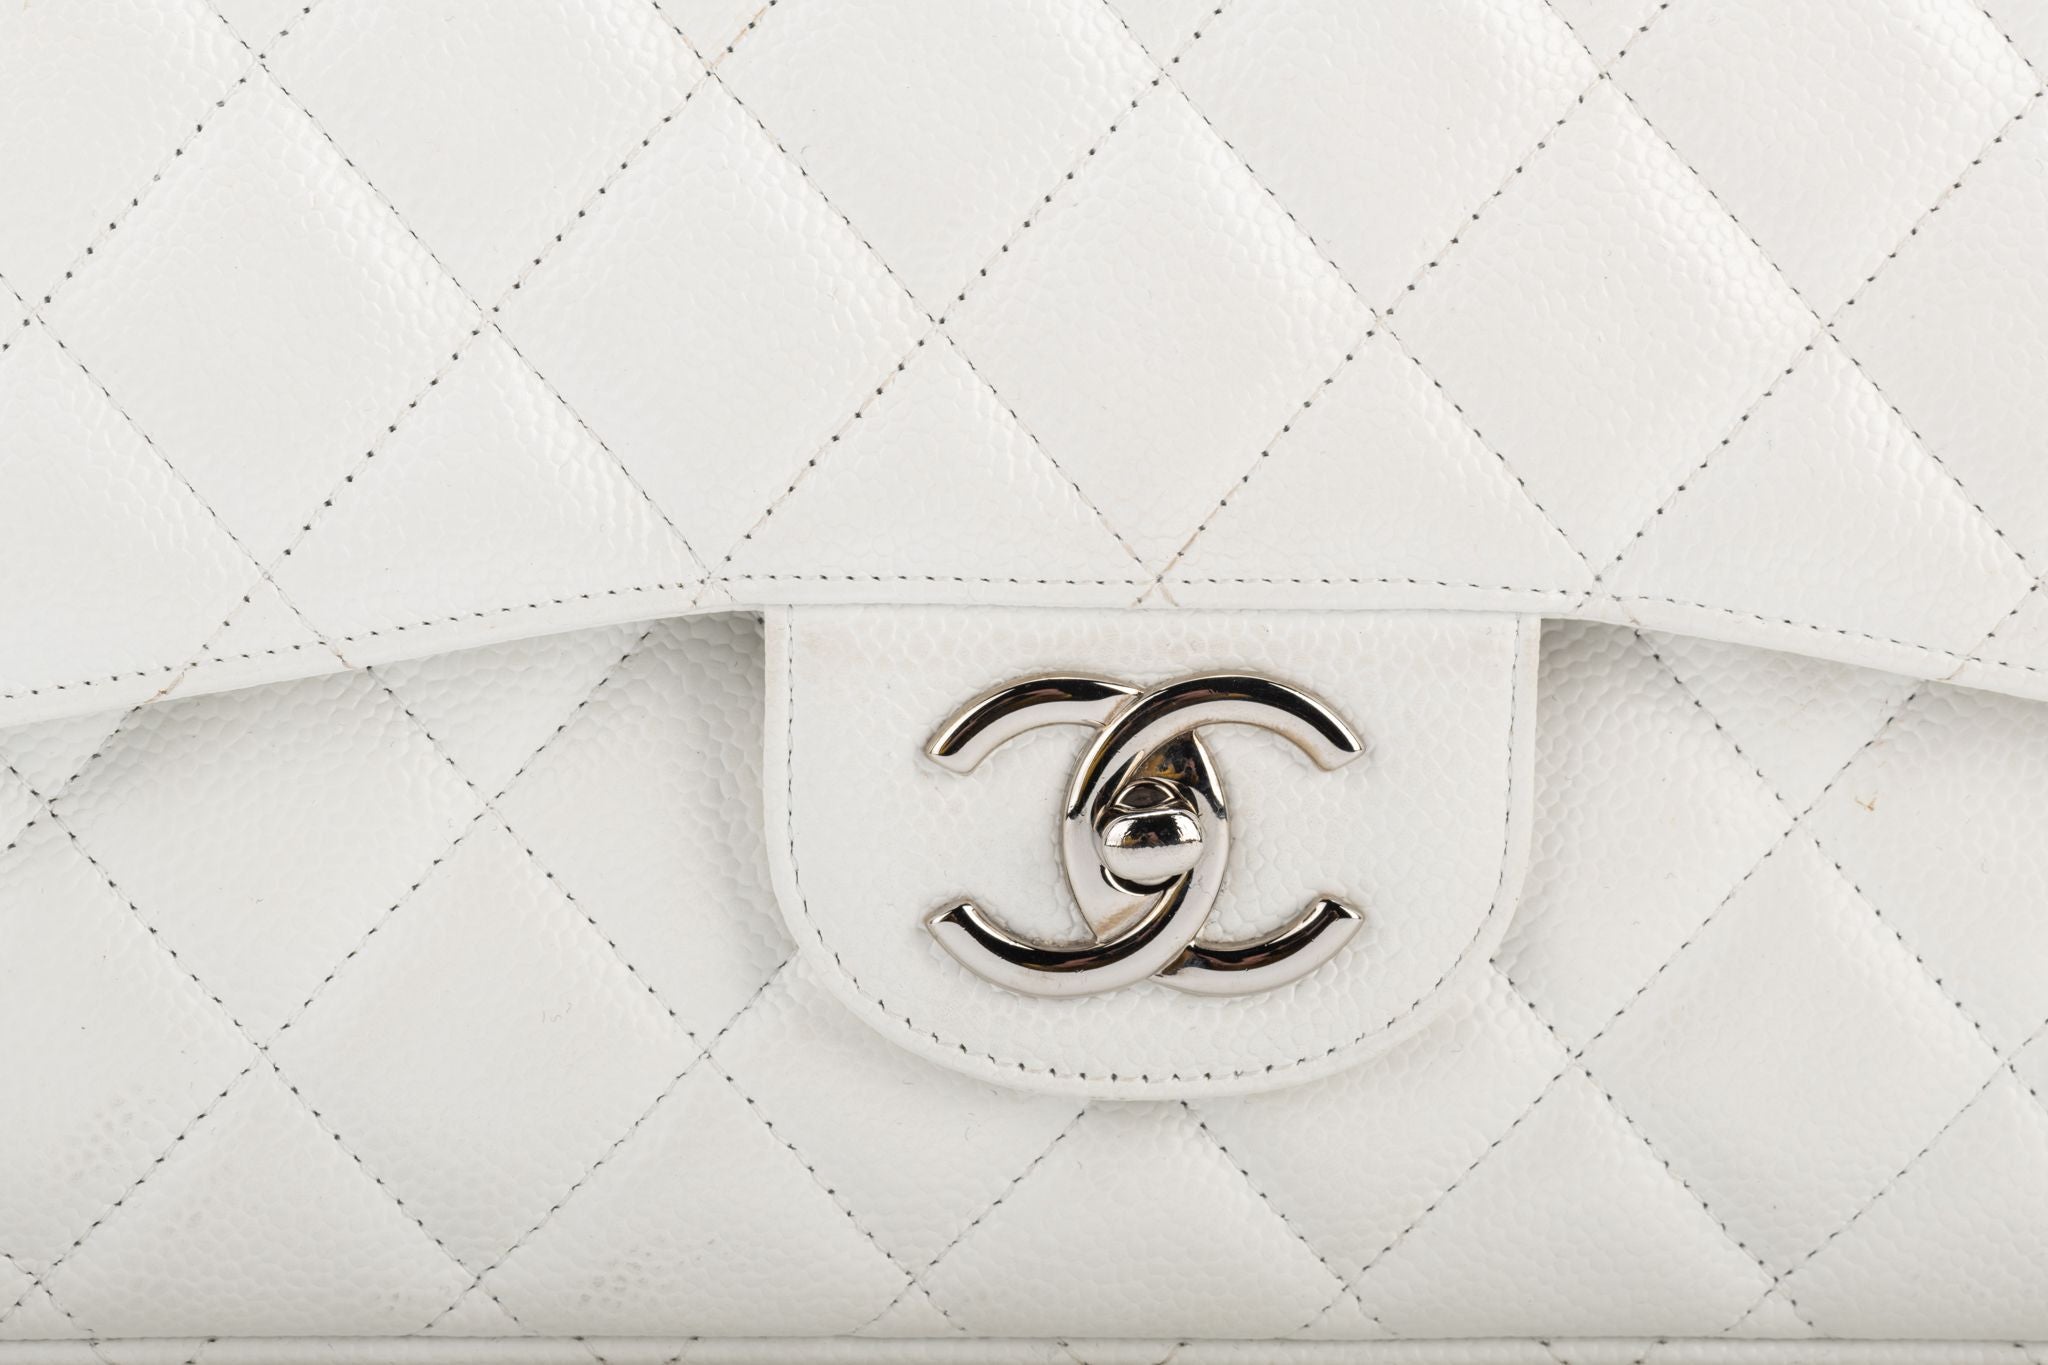 chanel classic double flap maxi insert